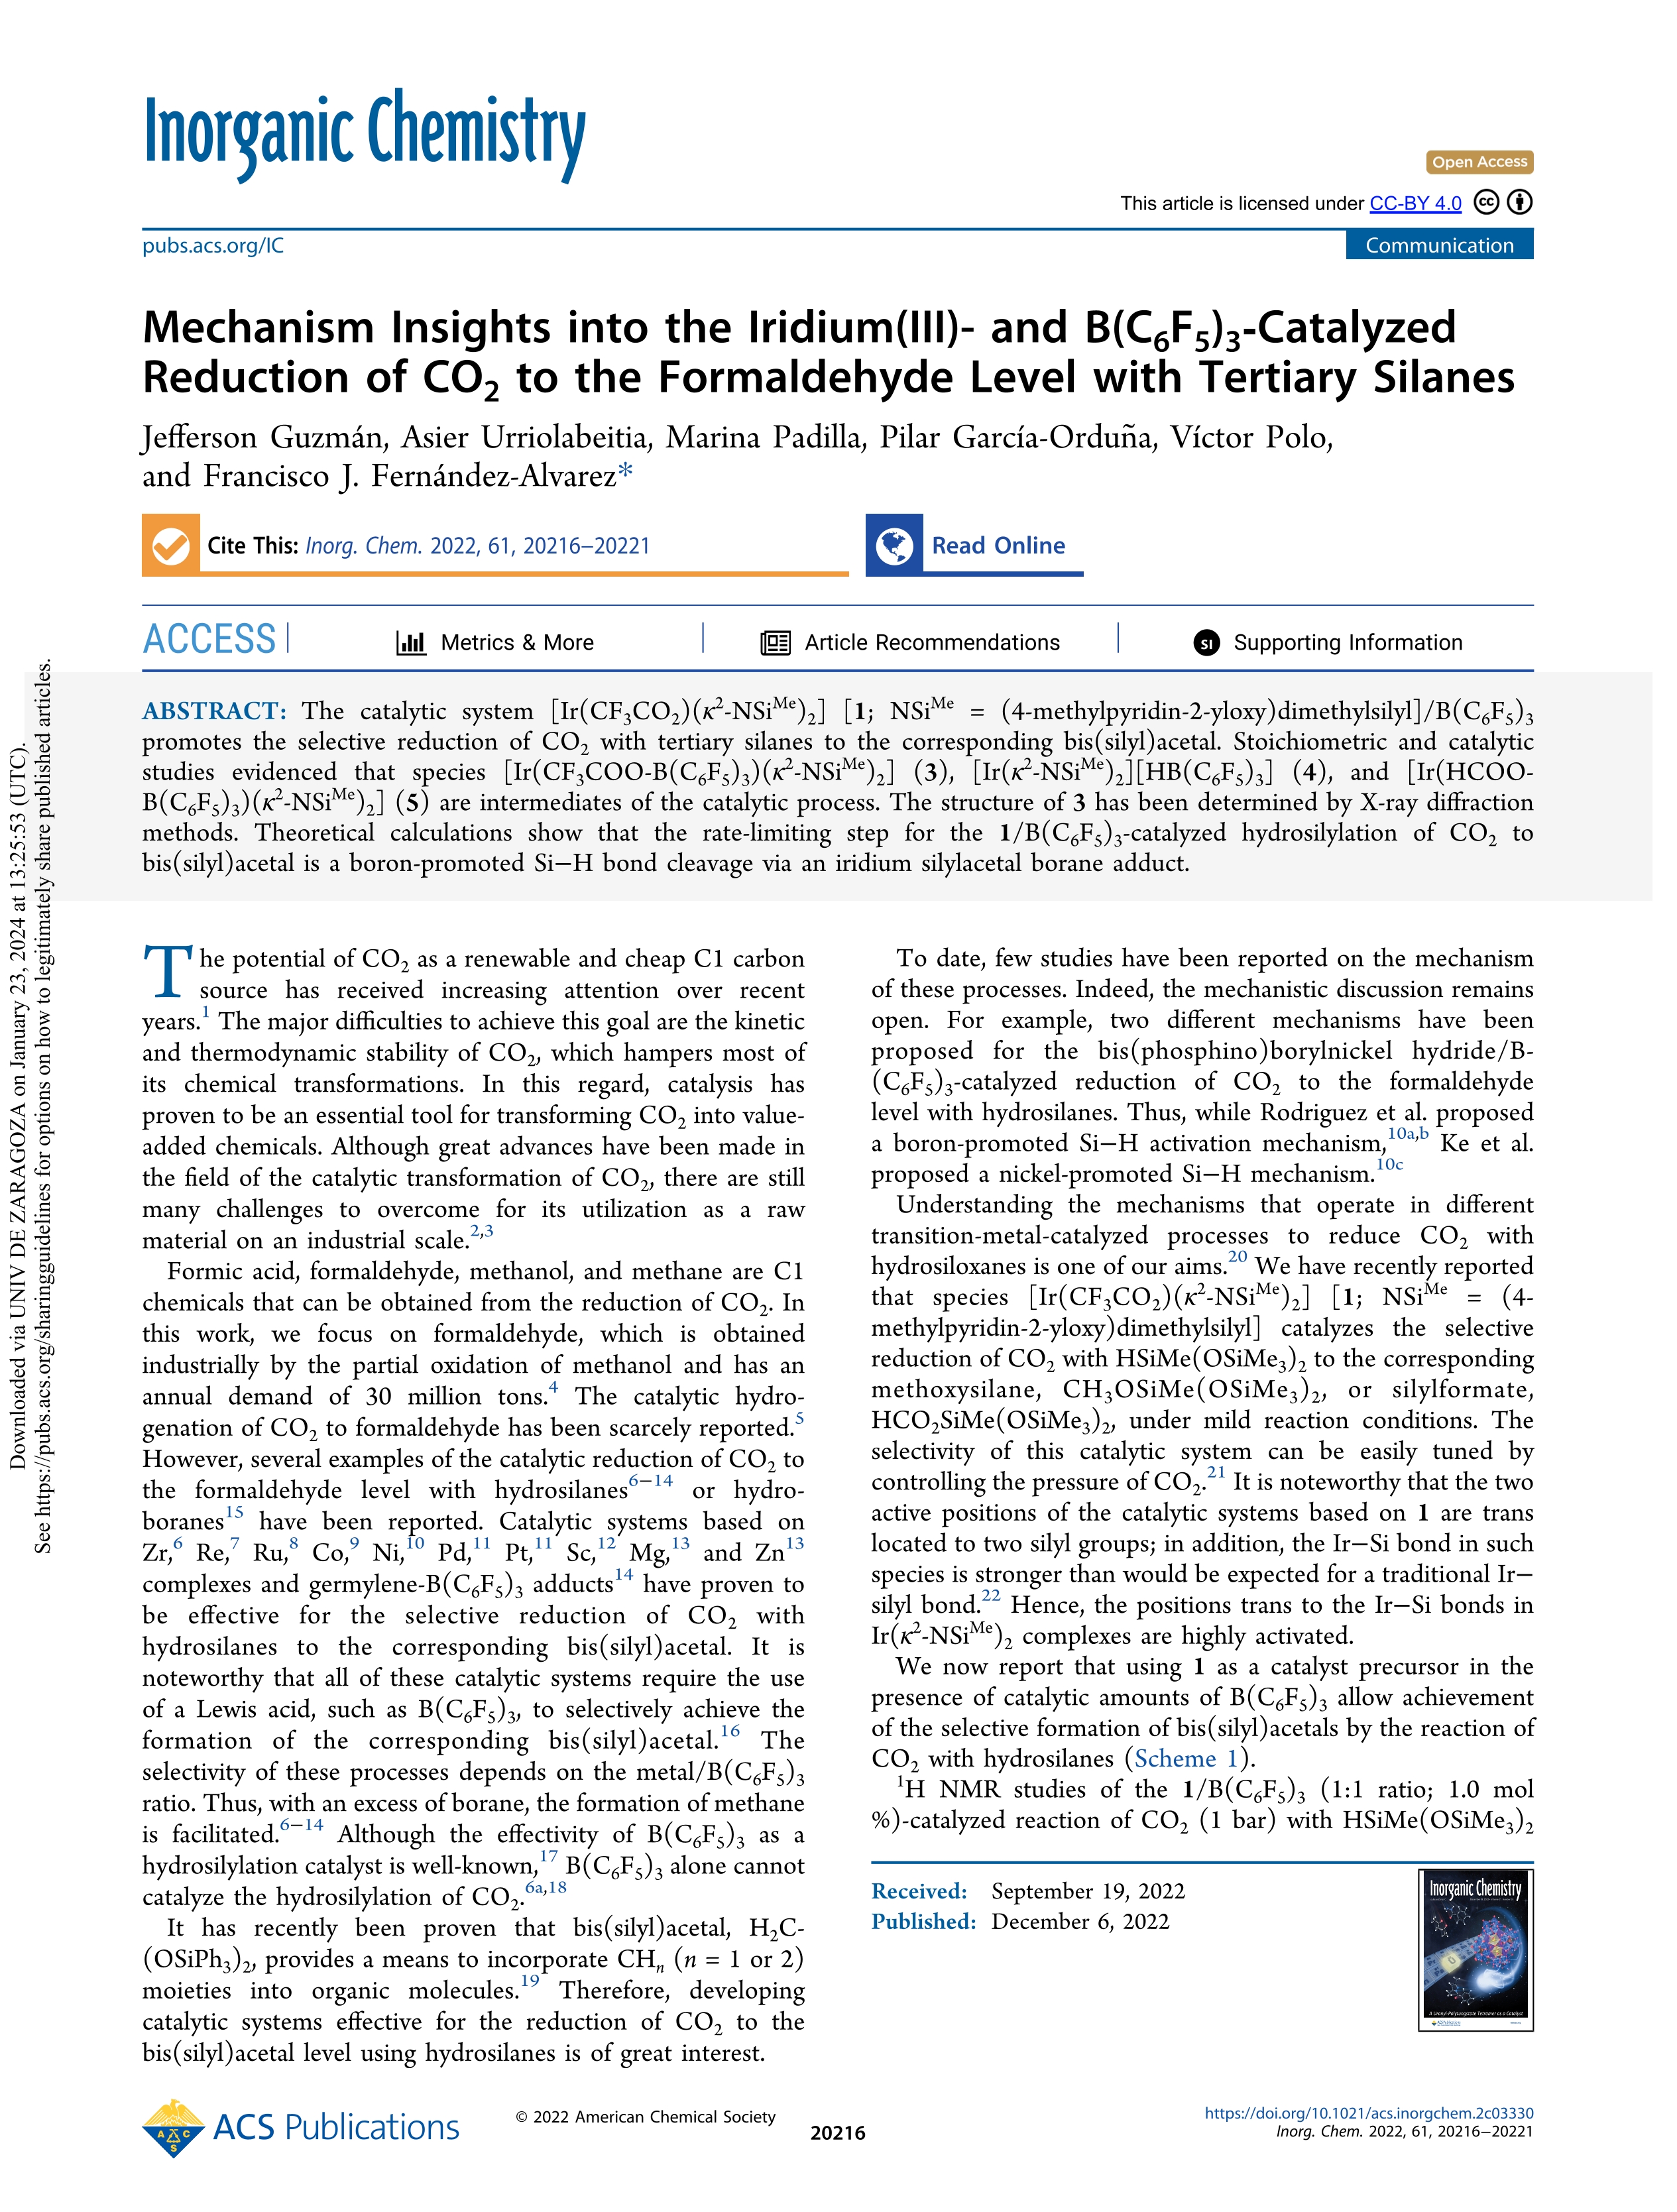 Mechanism insights into the Iridium(III)- and B(C6F5)3-Catalyzed reduction of CO2 to the Formaldehyde Level with Tertiary Silanes